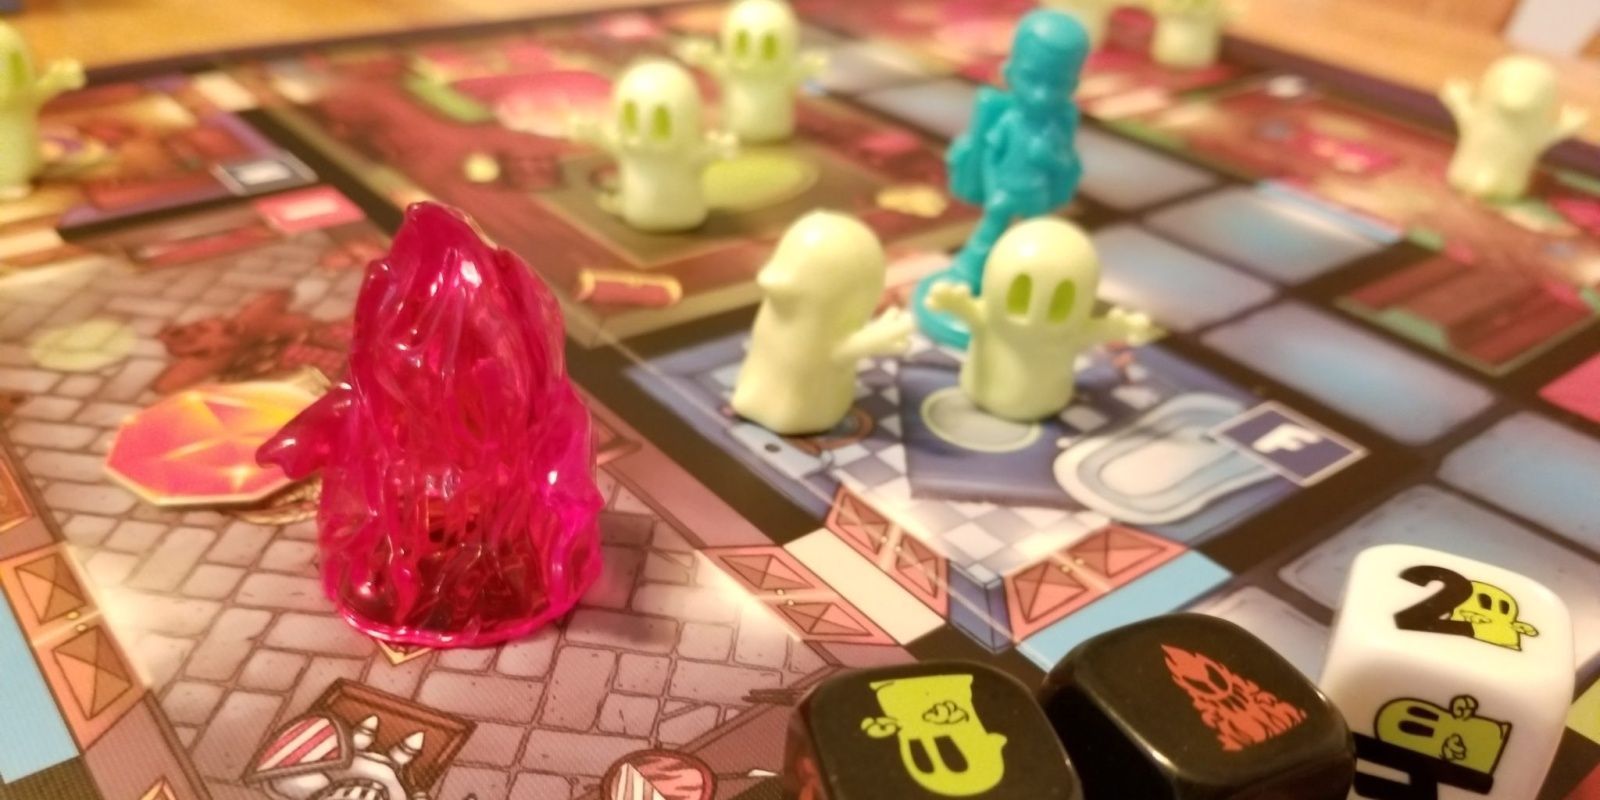 Ghost Fightin Treasure Hunters Board Game Being Played On The Table